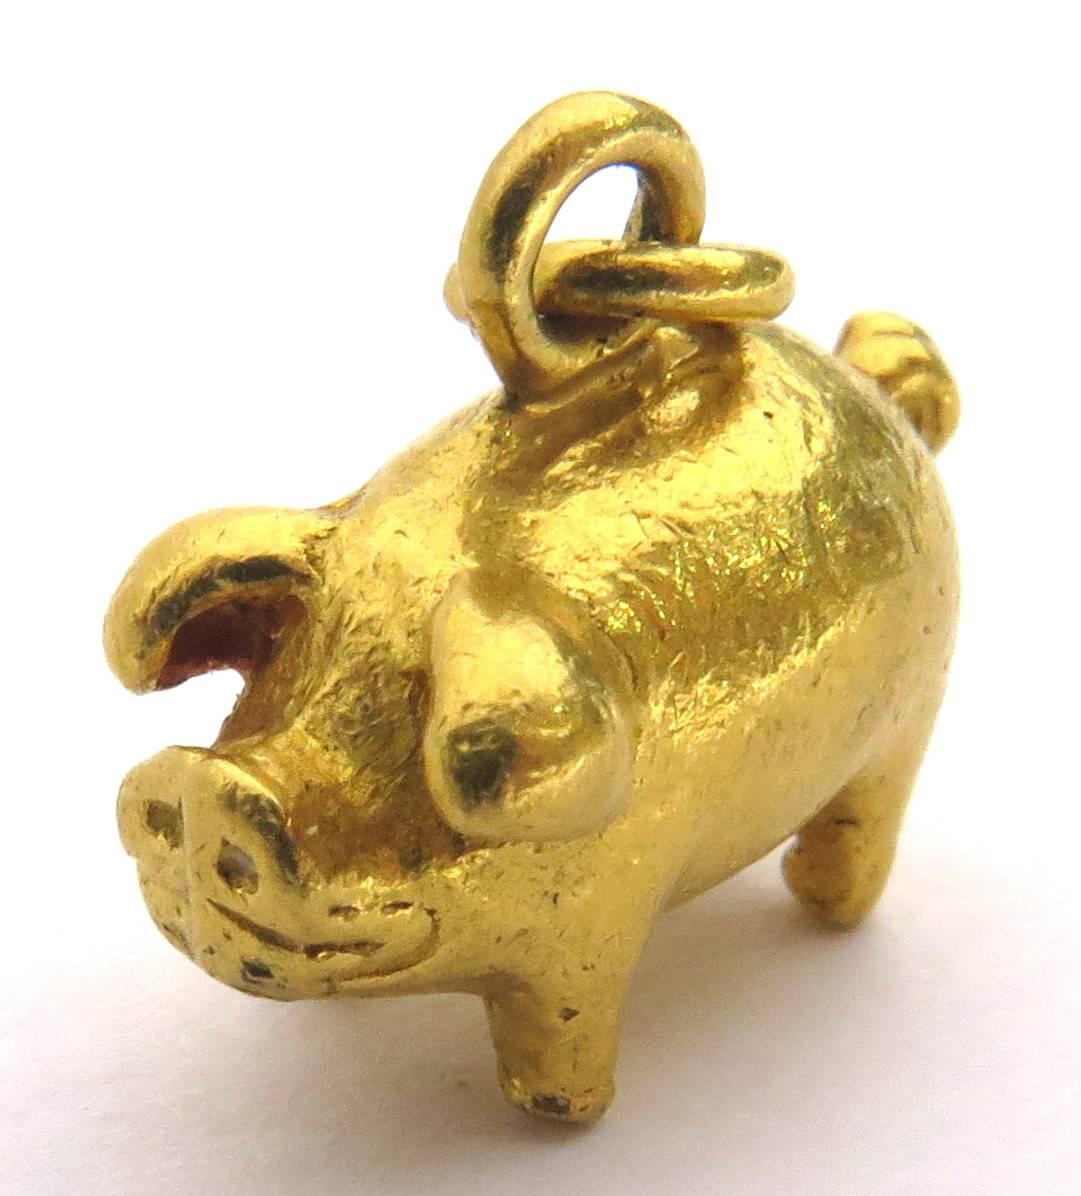 Any angle you use to look at this little guy is his good side. And his little snout is just irresistible! He is made of 22k gold and has a beautiful patina. He can be worn as either a charm or a pendant.
This little piggy weighs 3.1 grams
This